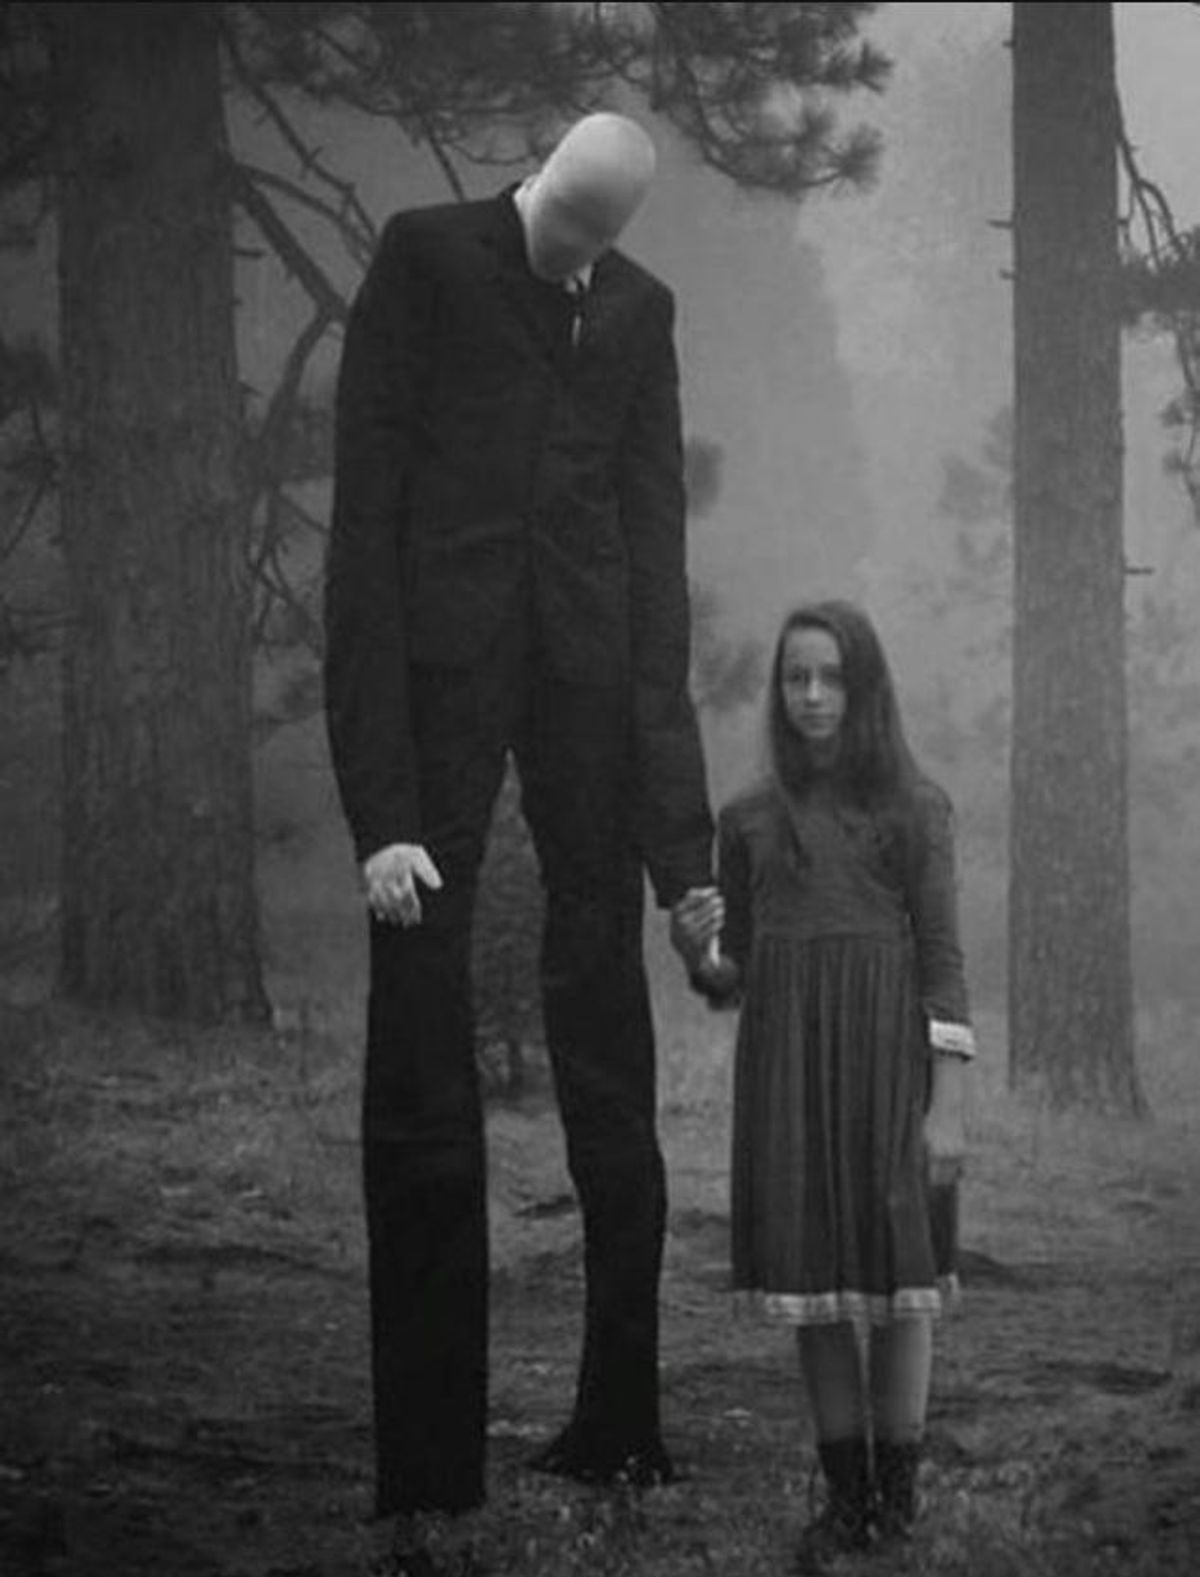 Slender Man--A Myth, A Meme, A Video Game, A Stabbing, And Now A Movie